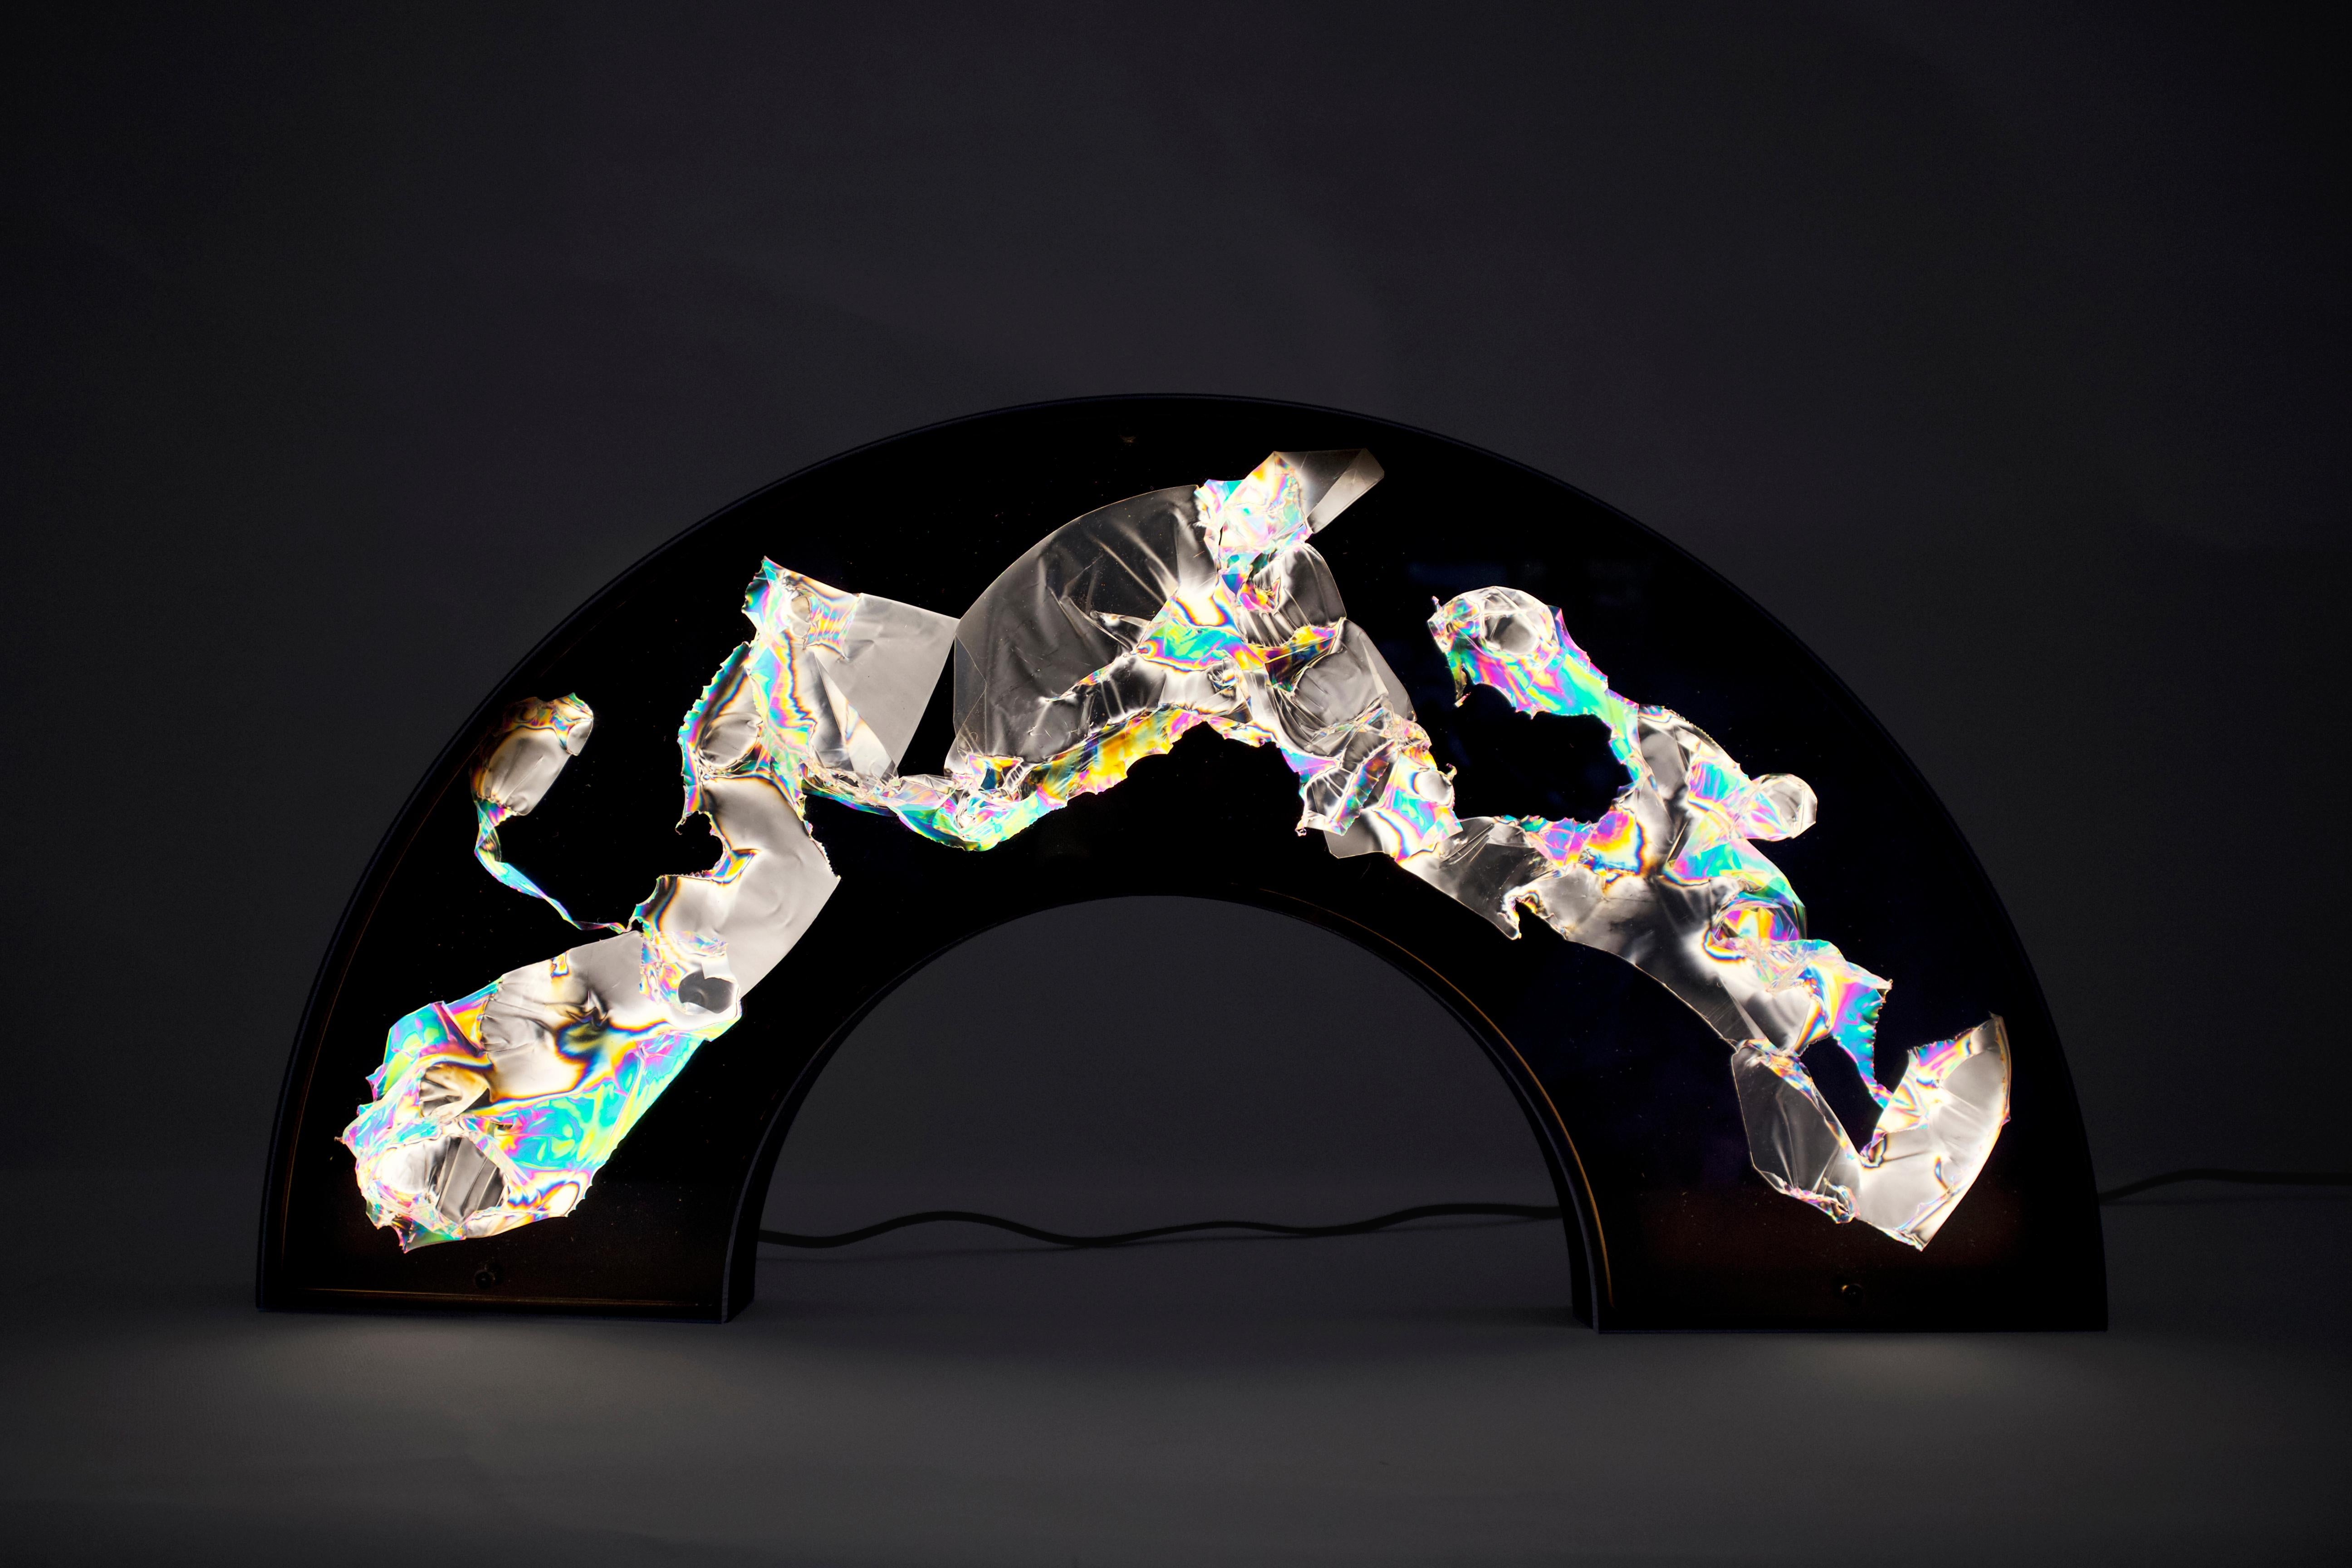 Wall lamp IV by Kajsa Willner
Dimensions: 30 x 60 x 4 cm
Materials: polarized filters, disposable plastic

Polarized portraits
Polarized portraits is a set of wall lights and lamps that use polarized light to reveal stress patterns in clear